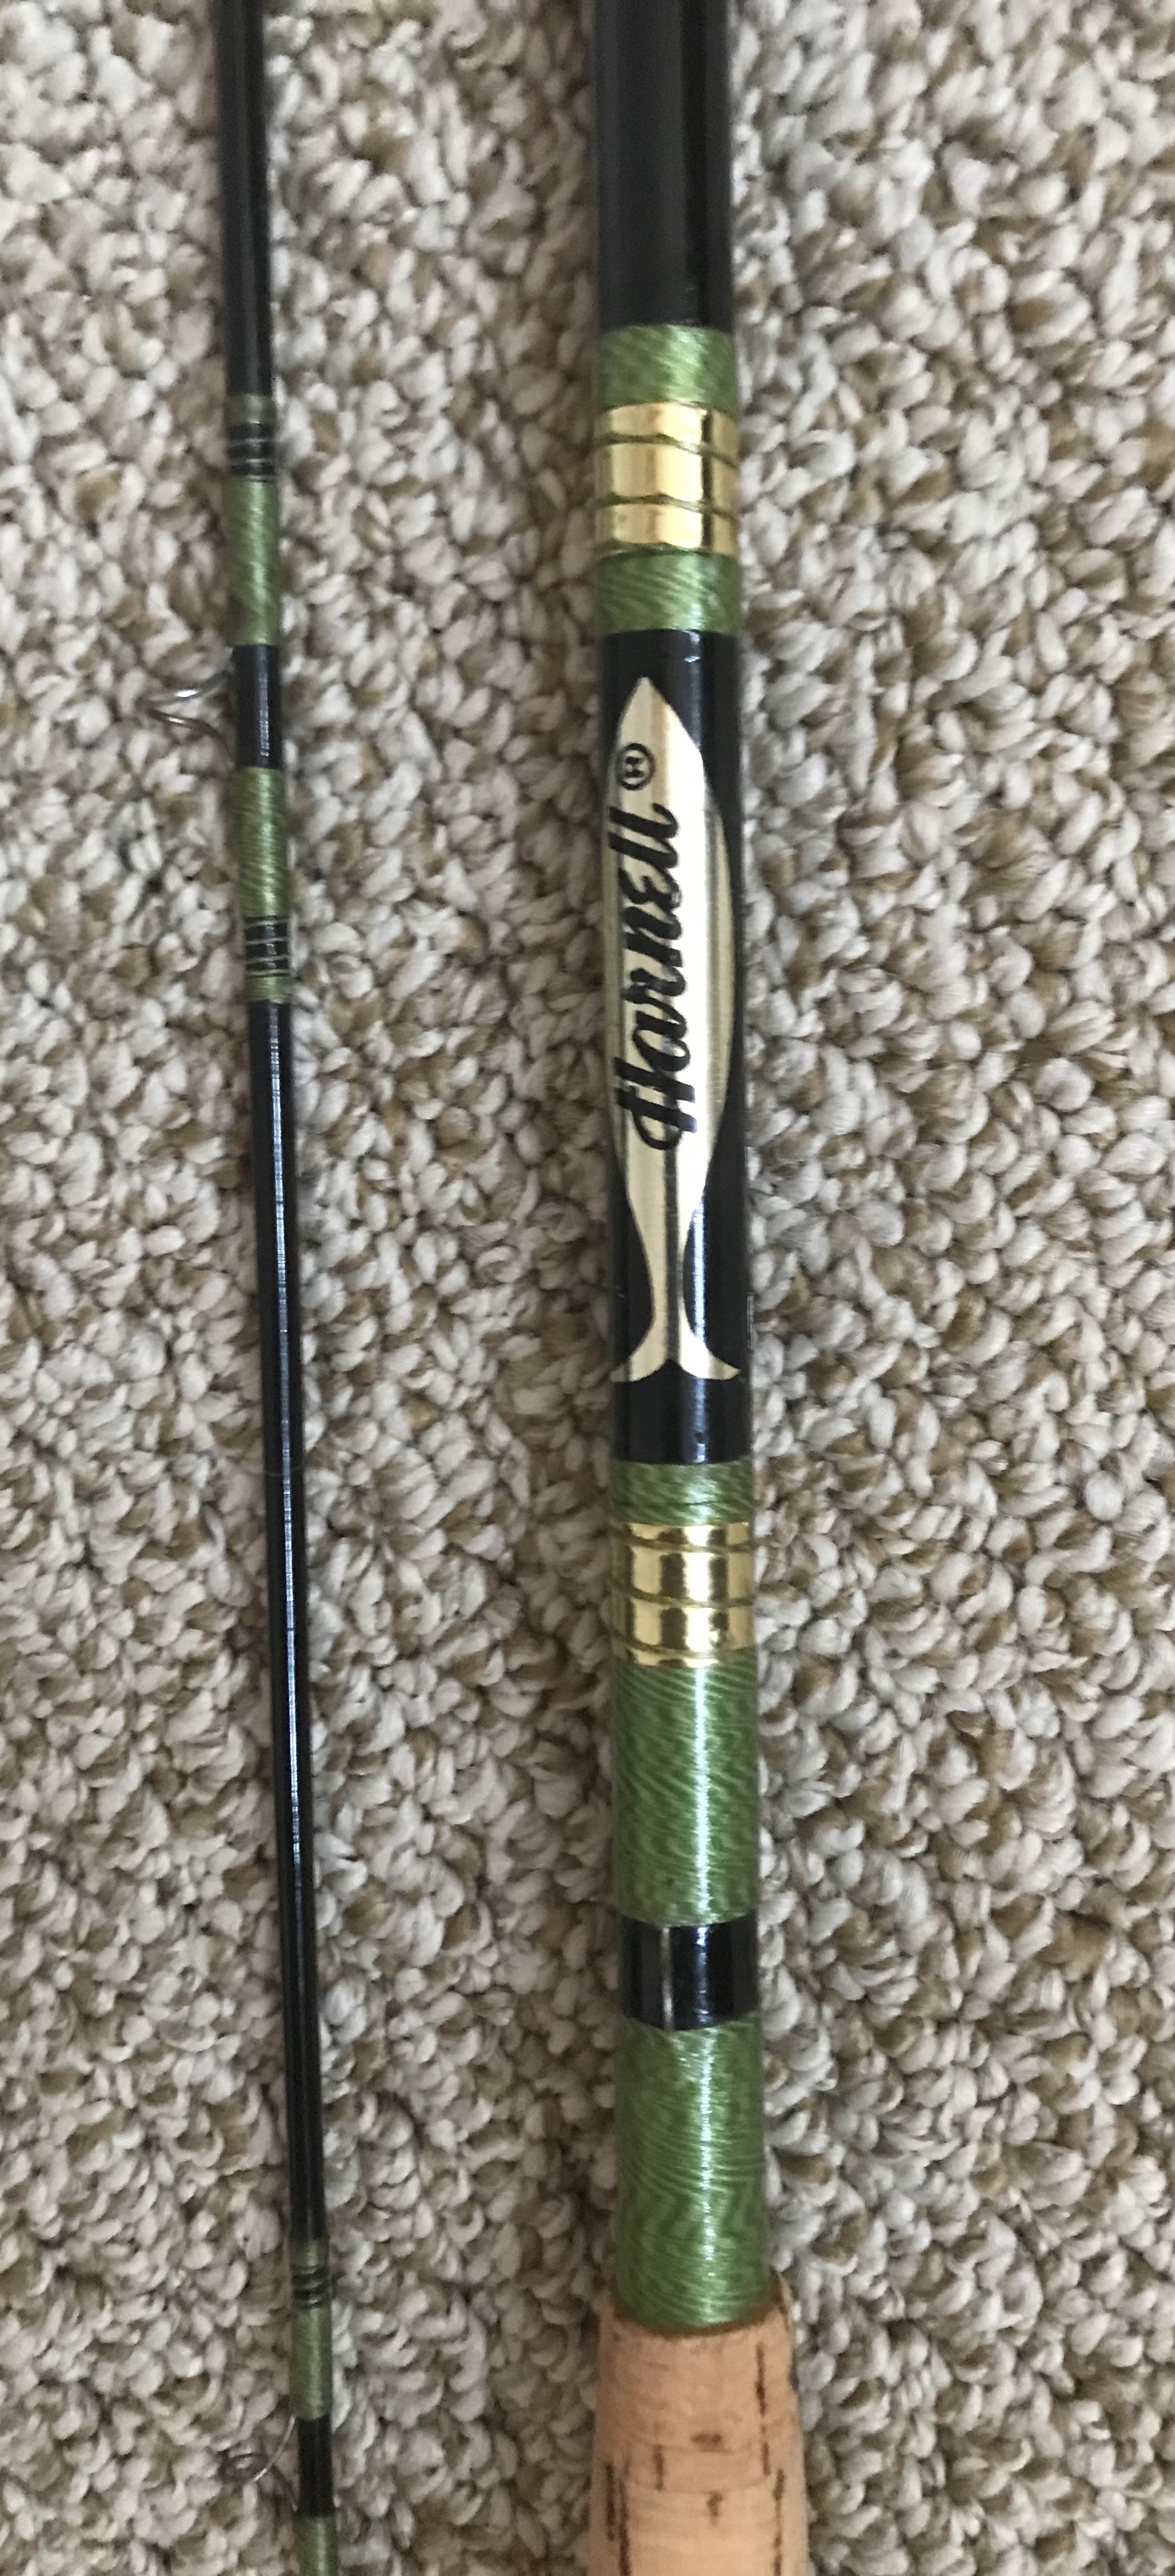 Harnell Fly Rod, Collecting Fiberglass Fly Rods